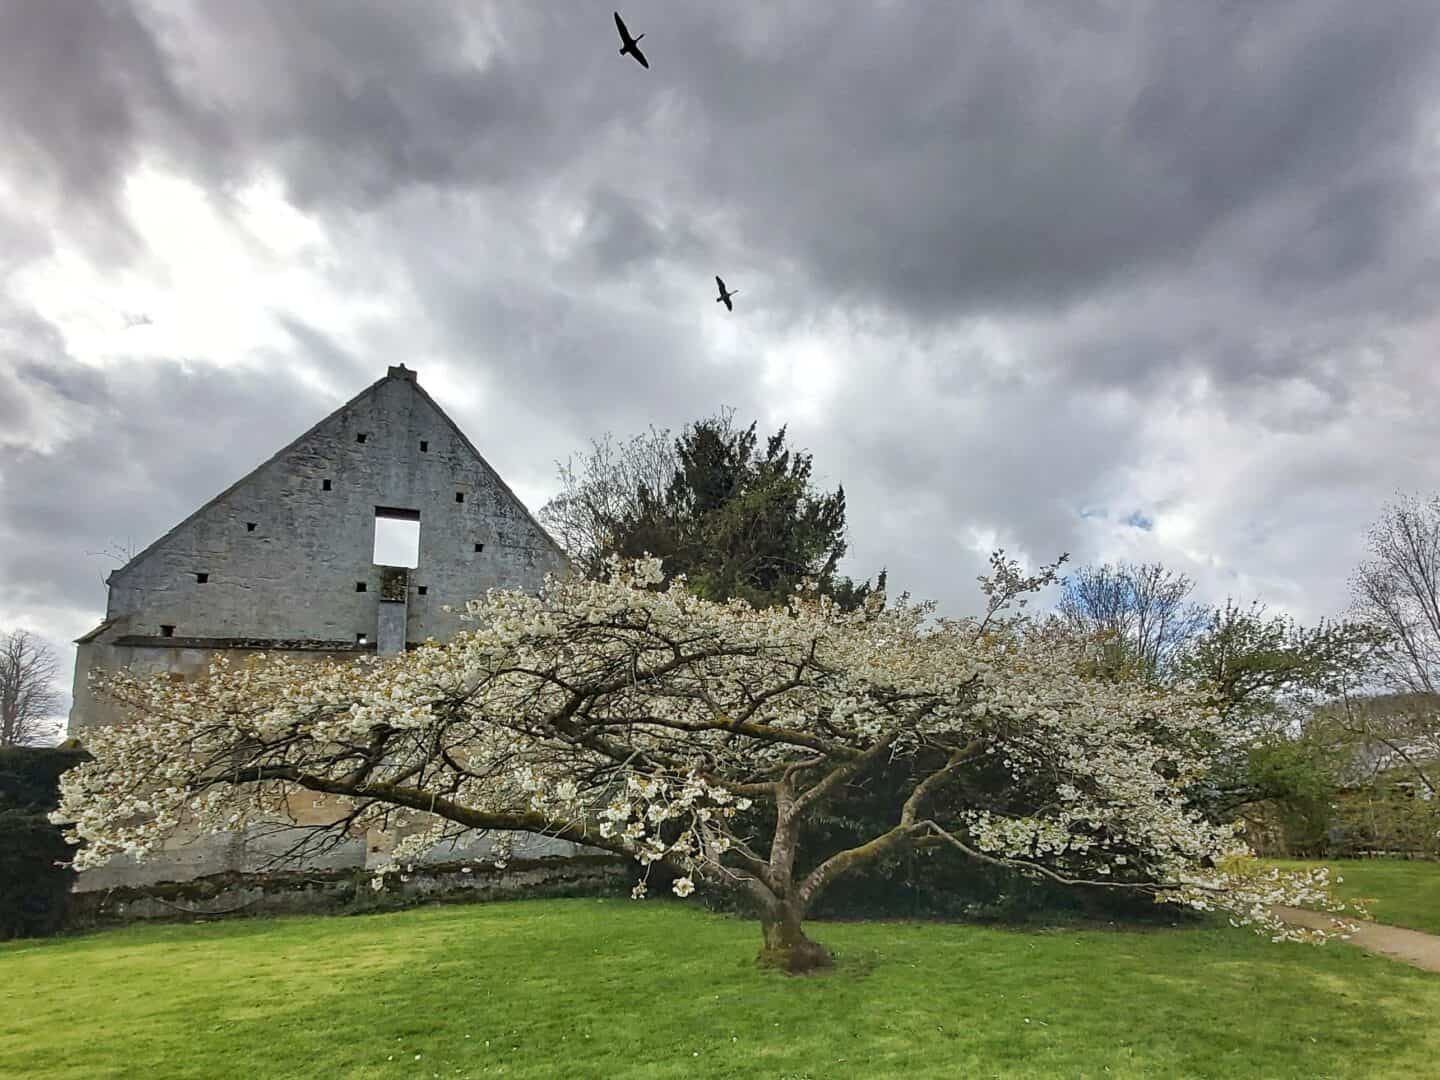 Dramatic skies behind a tree full of blossom with ducks flying overhead